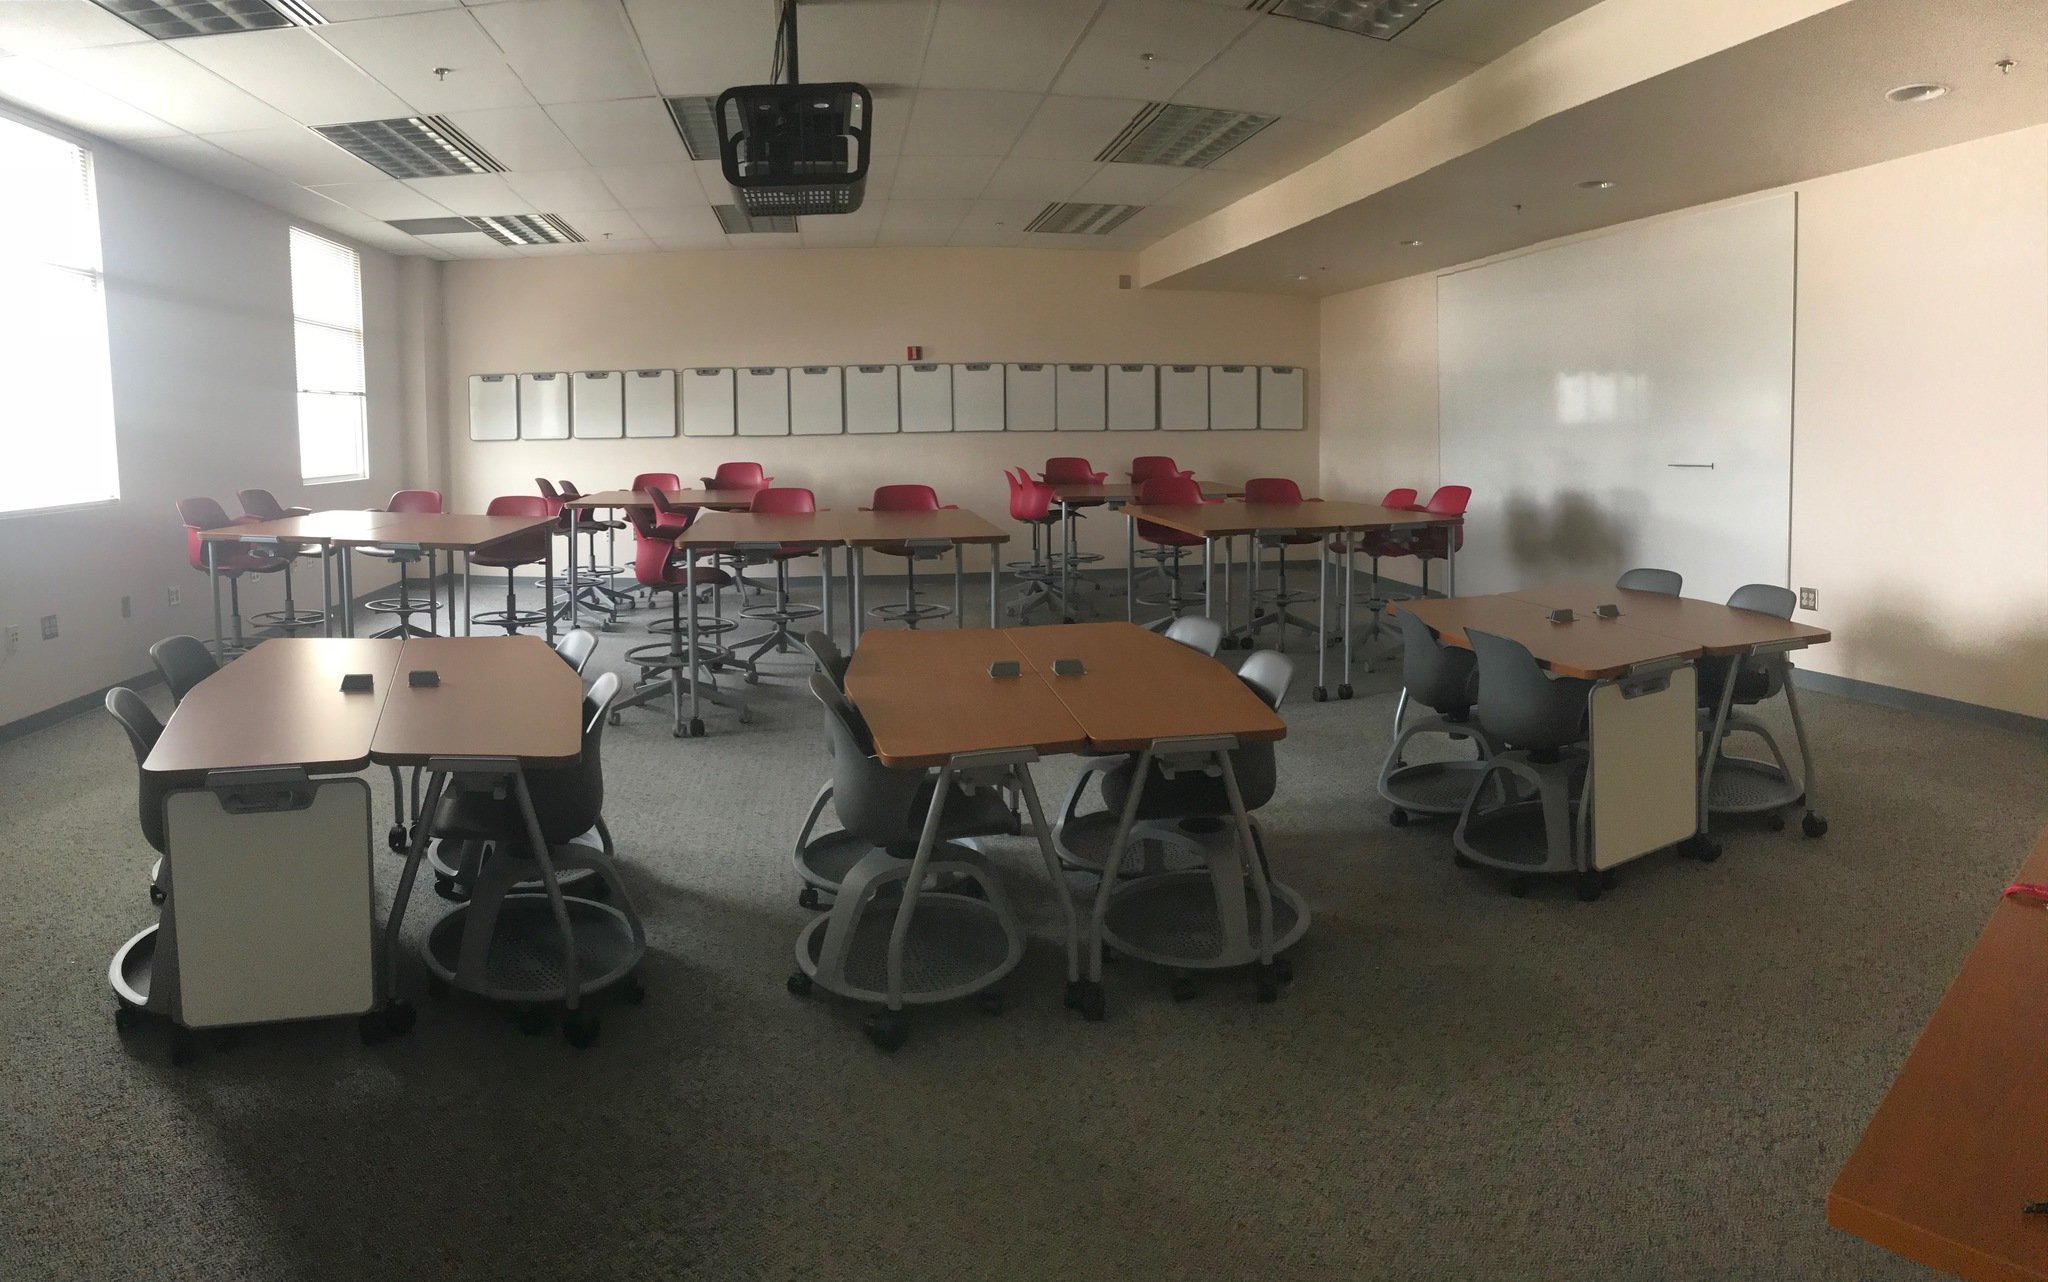 Tables and chairs arranged in an "active learning classroom" layout at New Mexico State